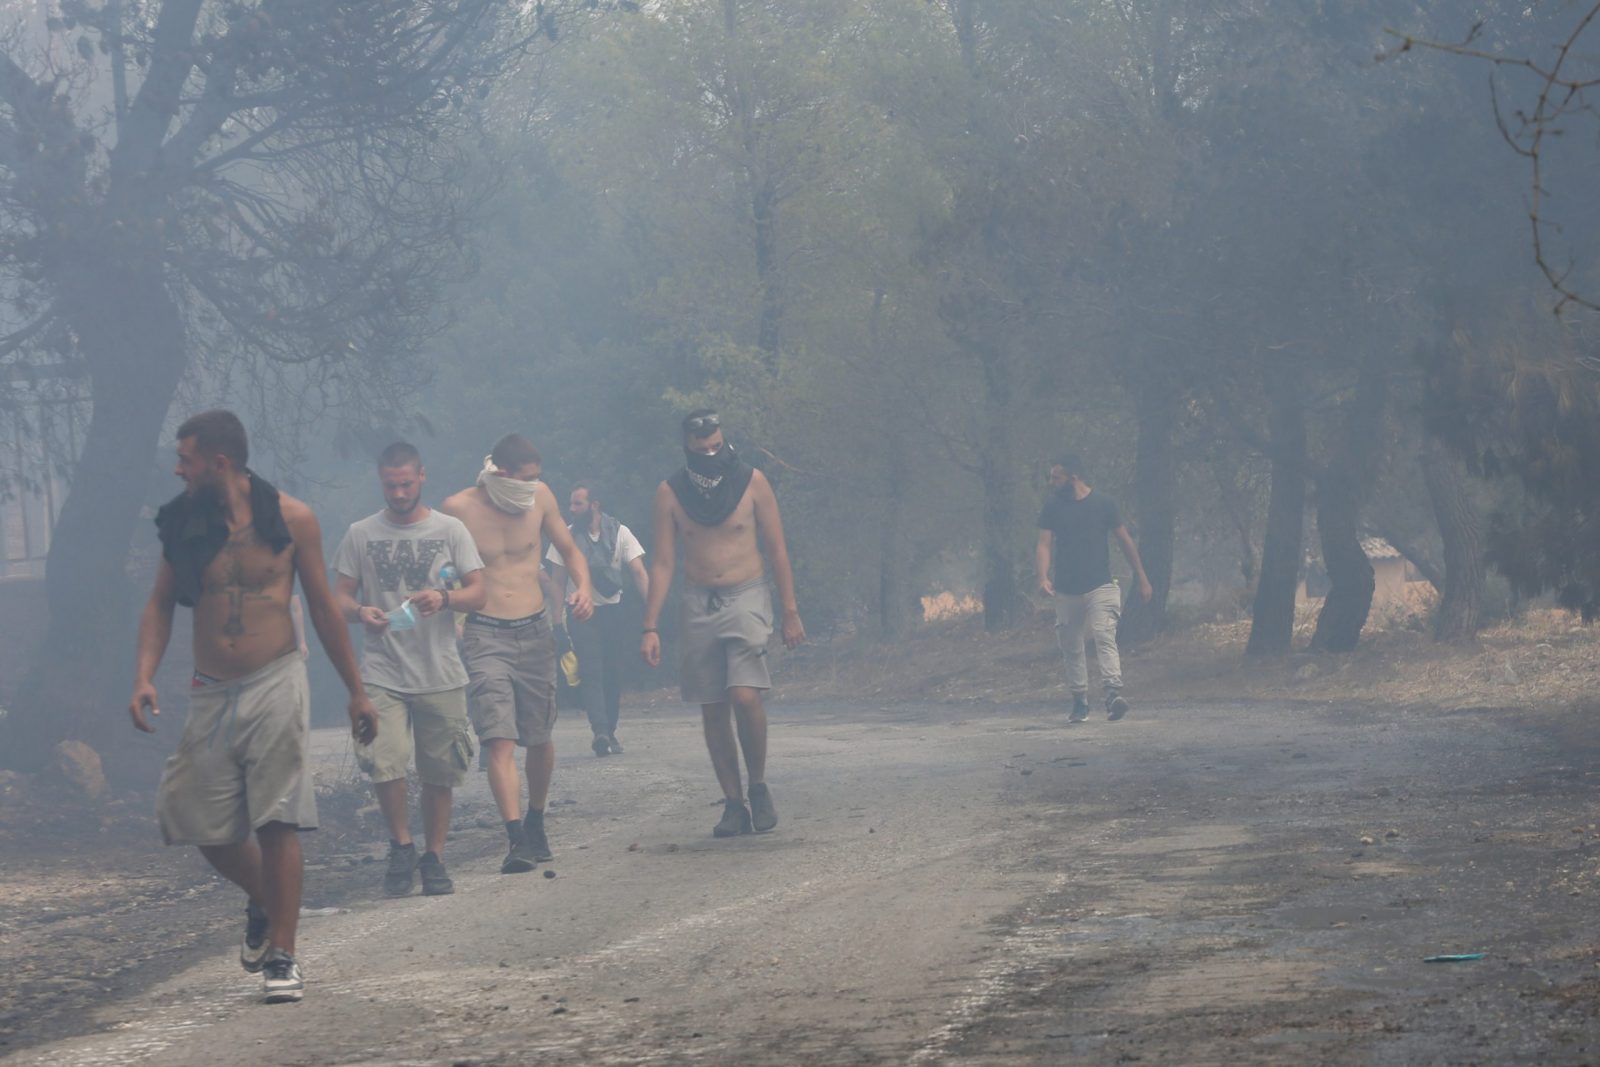 epa10816000 Residents walk through the smoke at Agia Paraskevi village near Acharnes, Attica, Greece, 23 August 2023. Fire Brigade forces continue to battle a series of fire fronts across the country as a total of 209 wildfires broke out.  EPA/ALEXANDROS BELTES